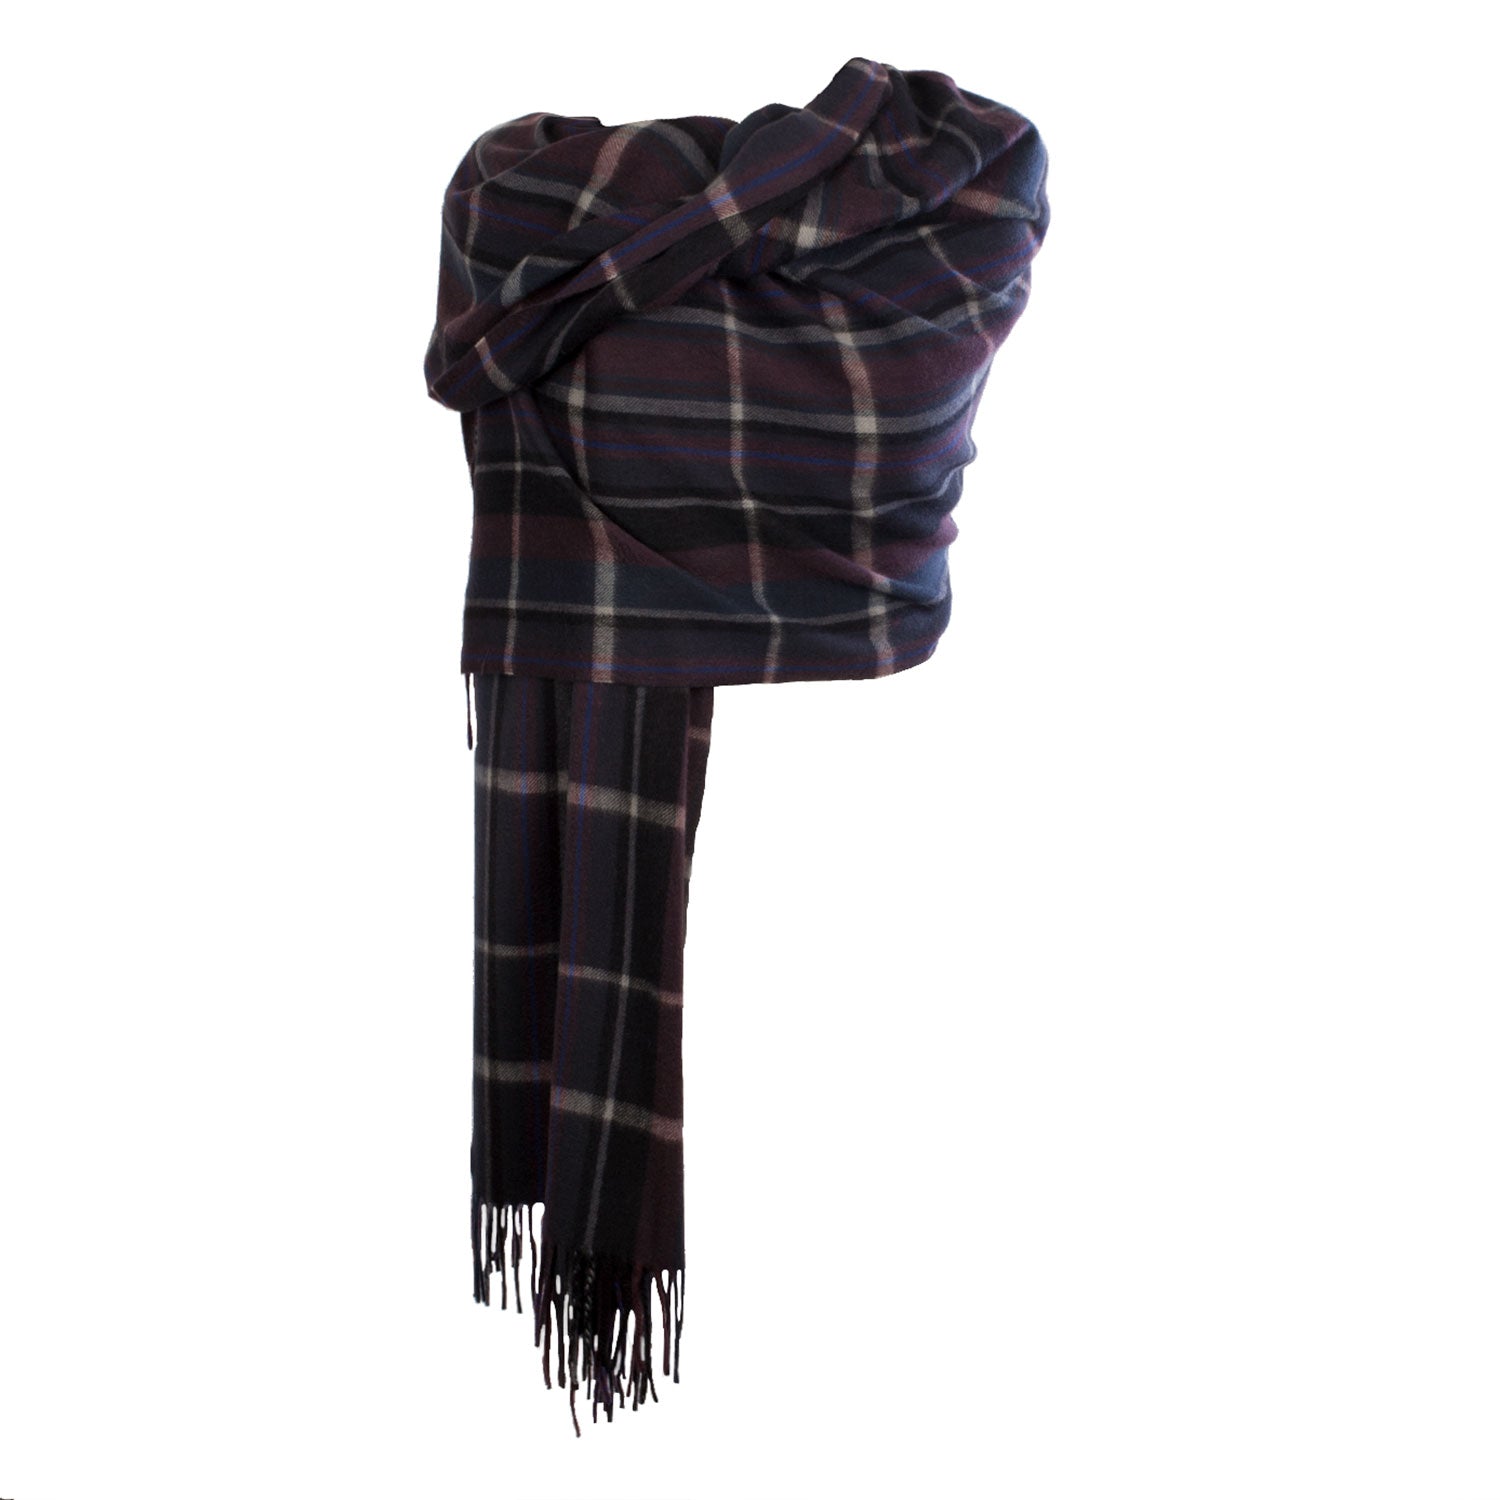 Clare Haggas Scarf Ring - Ladies from Humes Outfitters